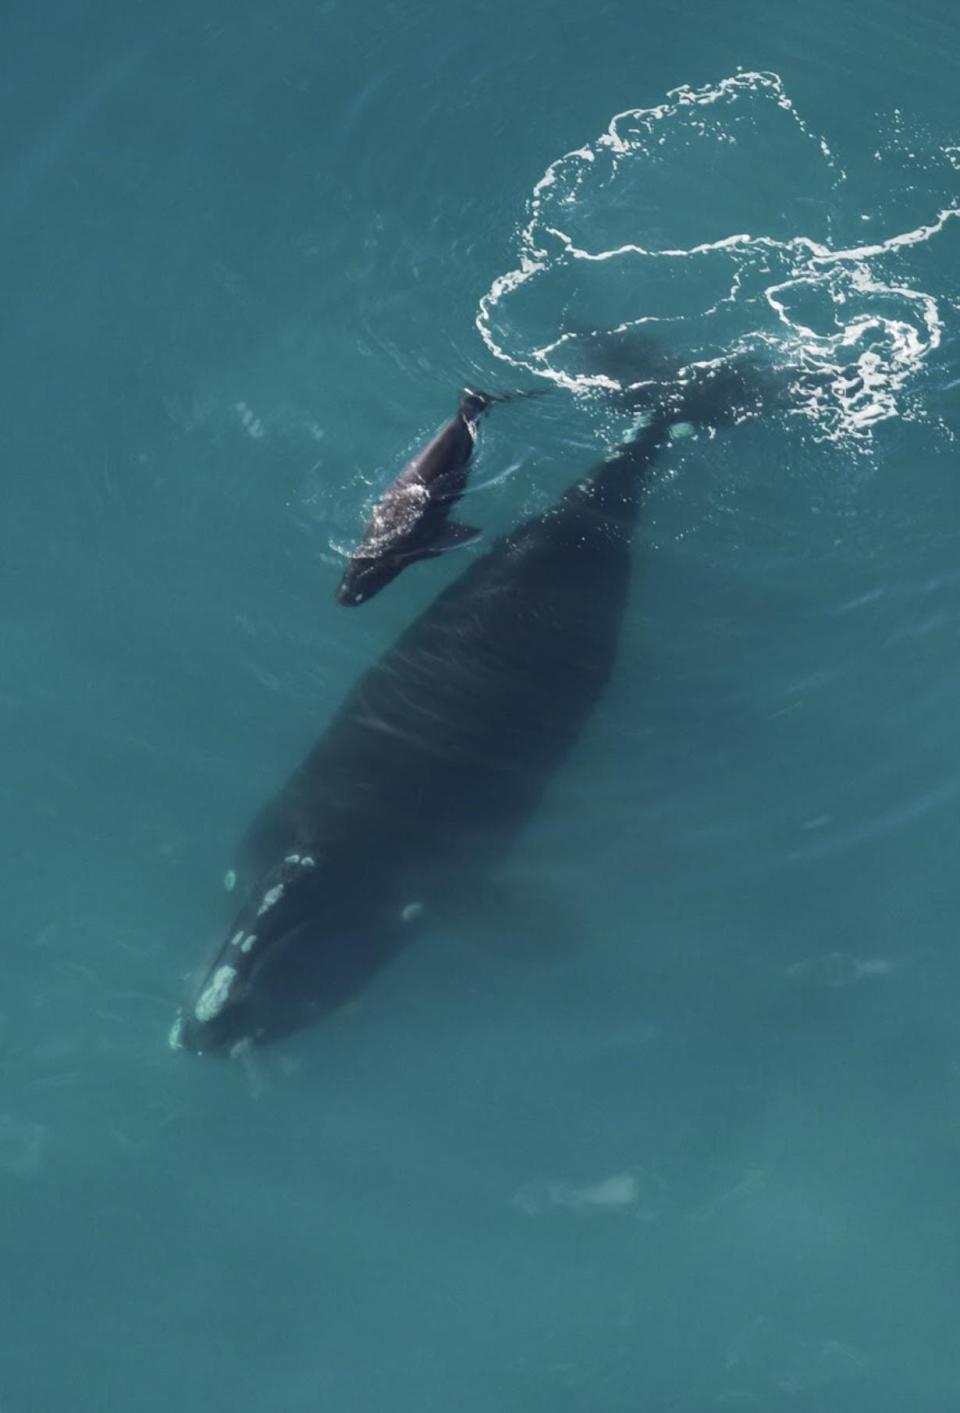 The North Atlantic right whale is one of the world’s most endangered large whale species; the latest preliminary estimate suggests there are fewer than 350 remaining.